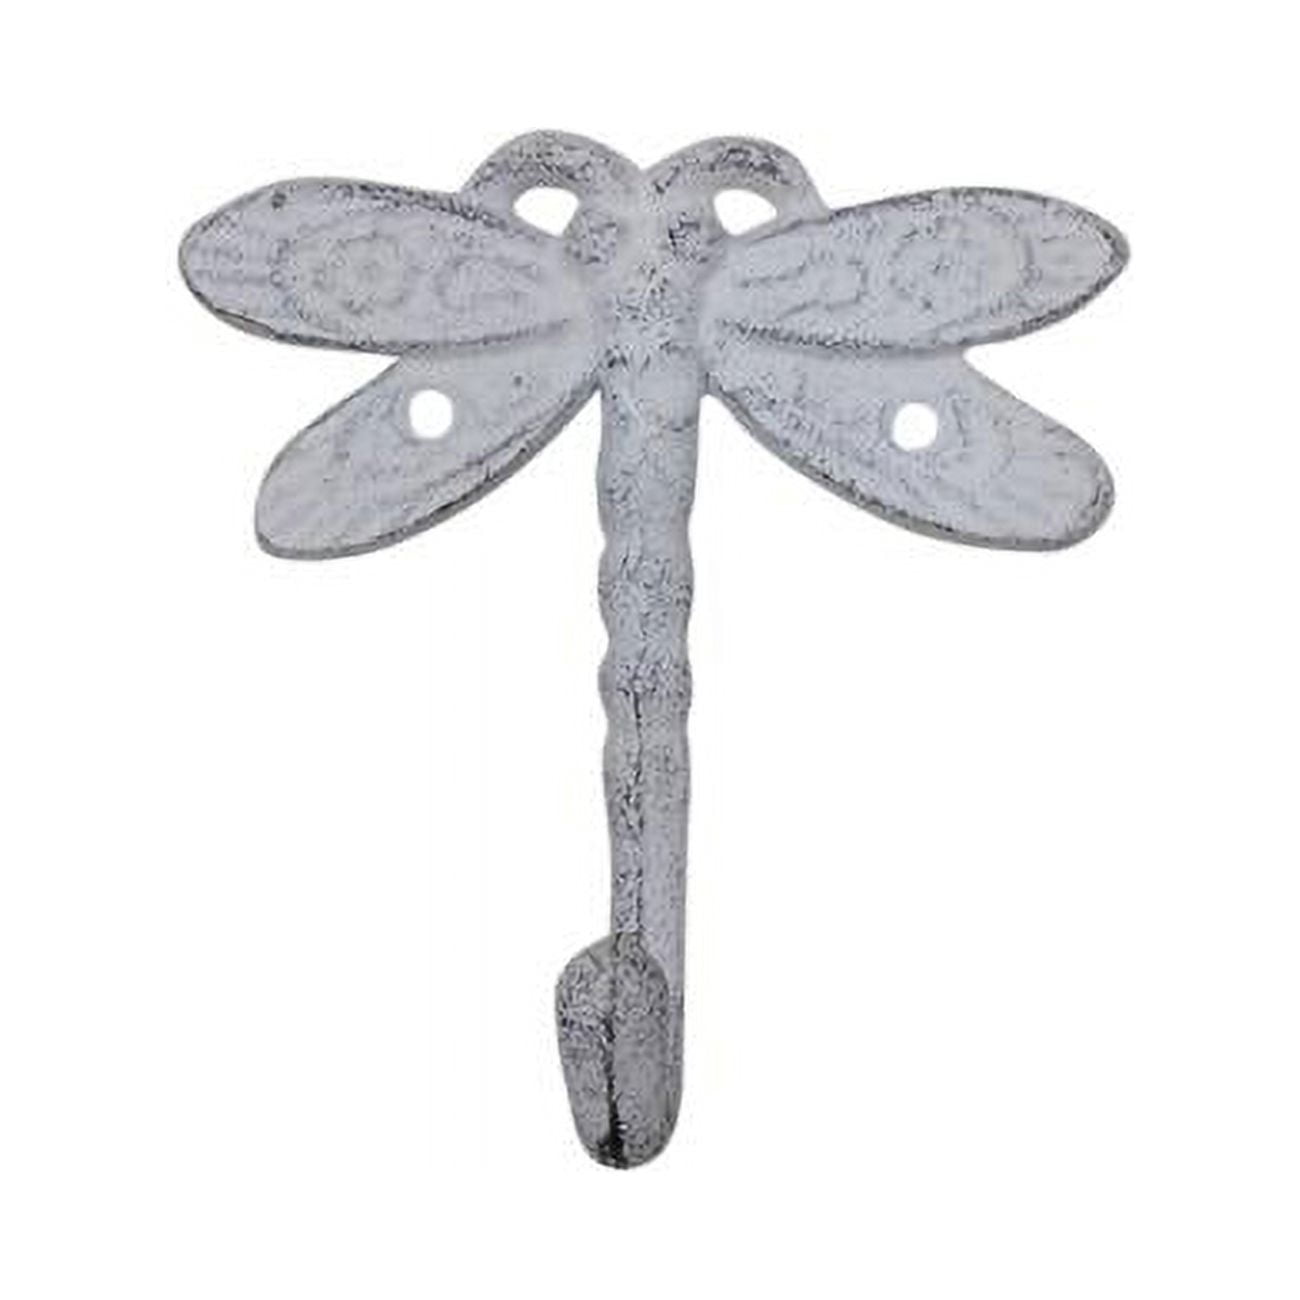 Handcrafted Model Ships 5 x 2 x 4 in. Whitewashed Cast Iron Dragonfly Decorative  Metal Wall Hooks 